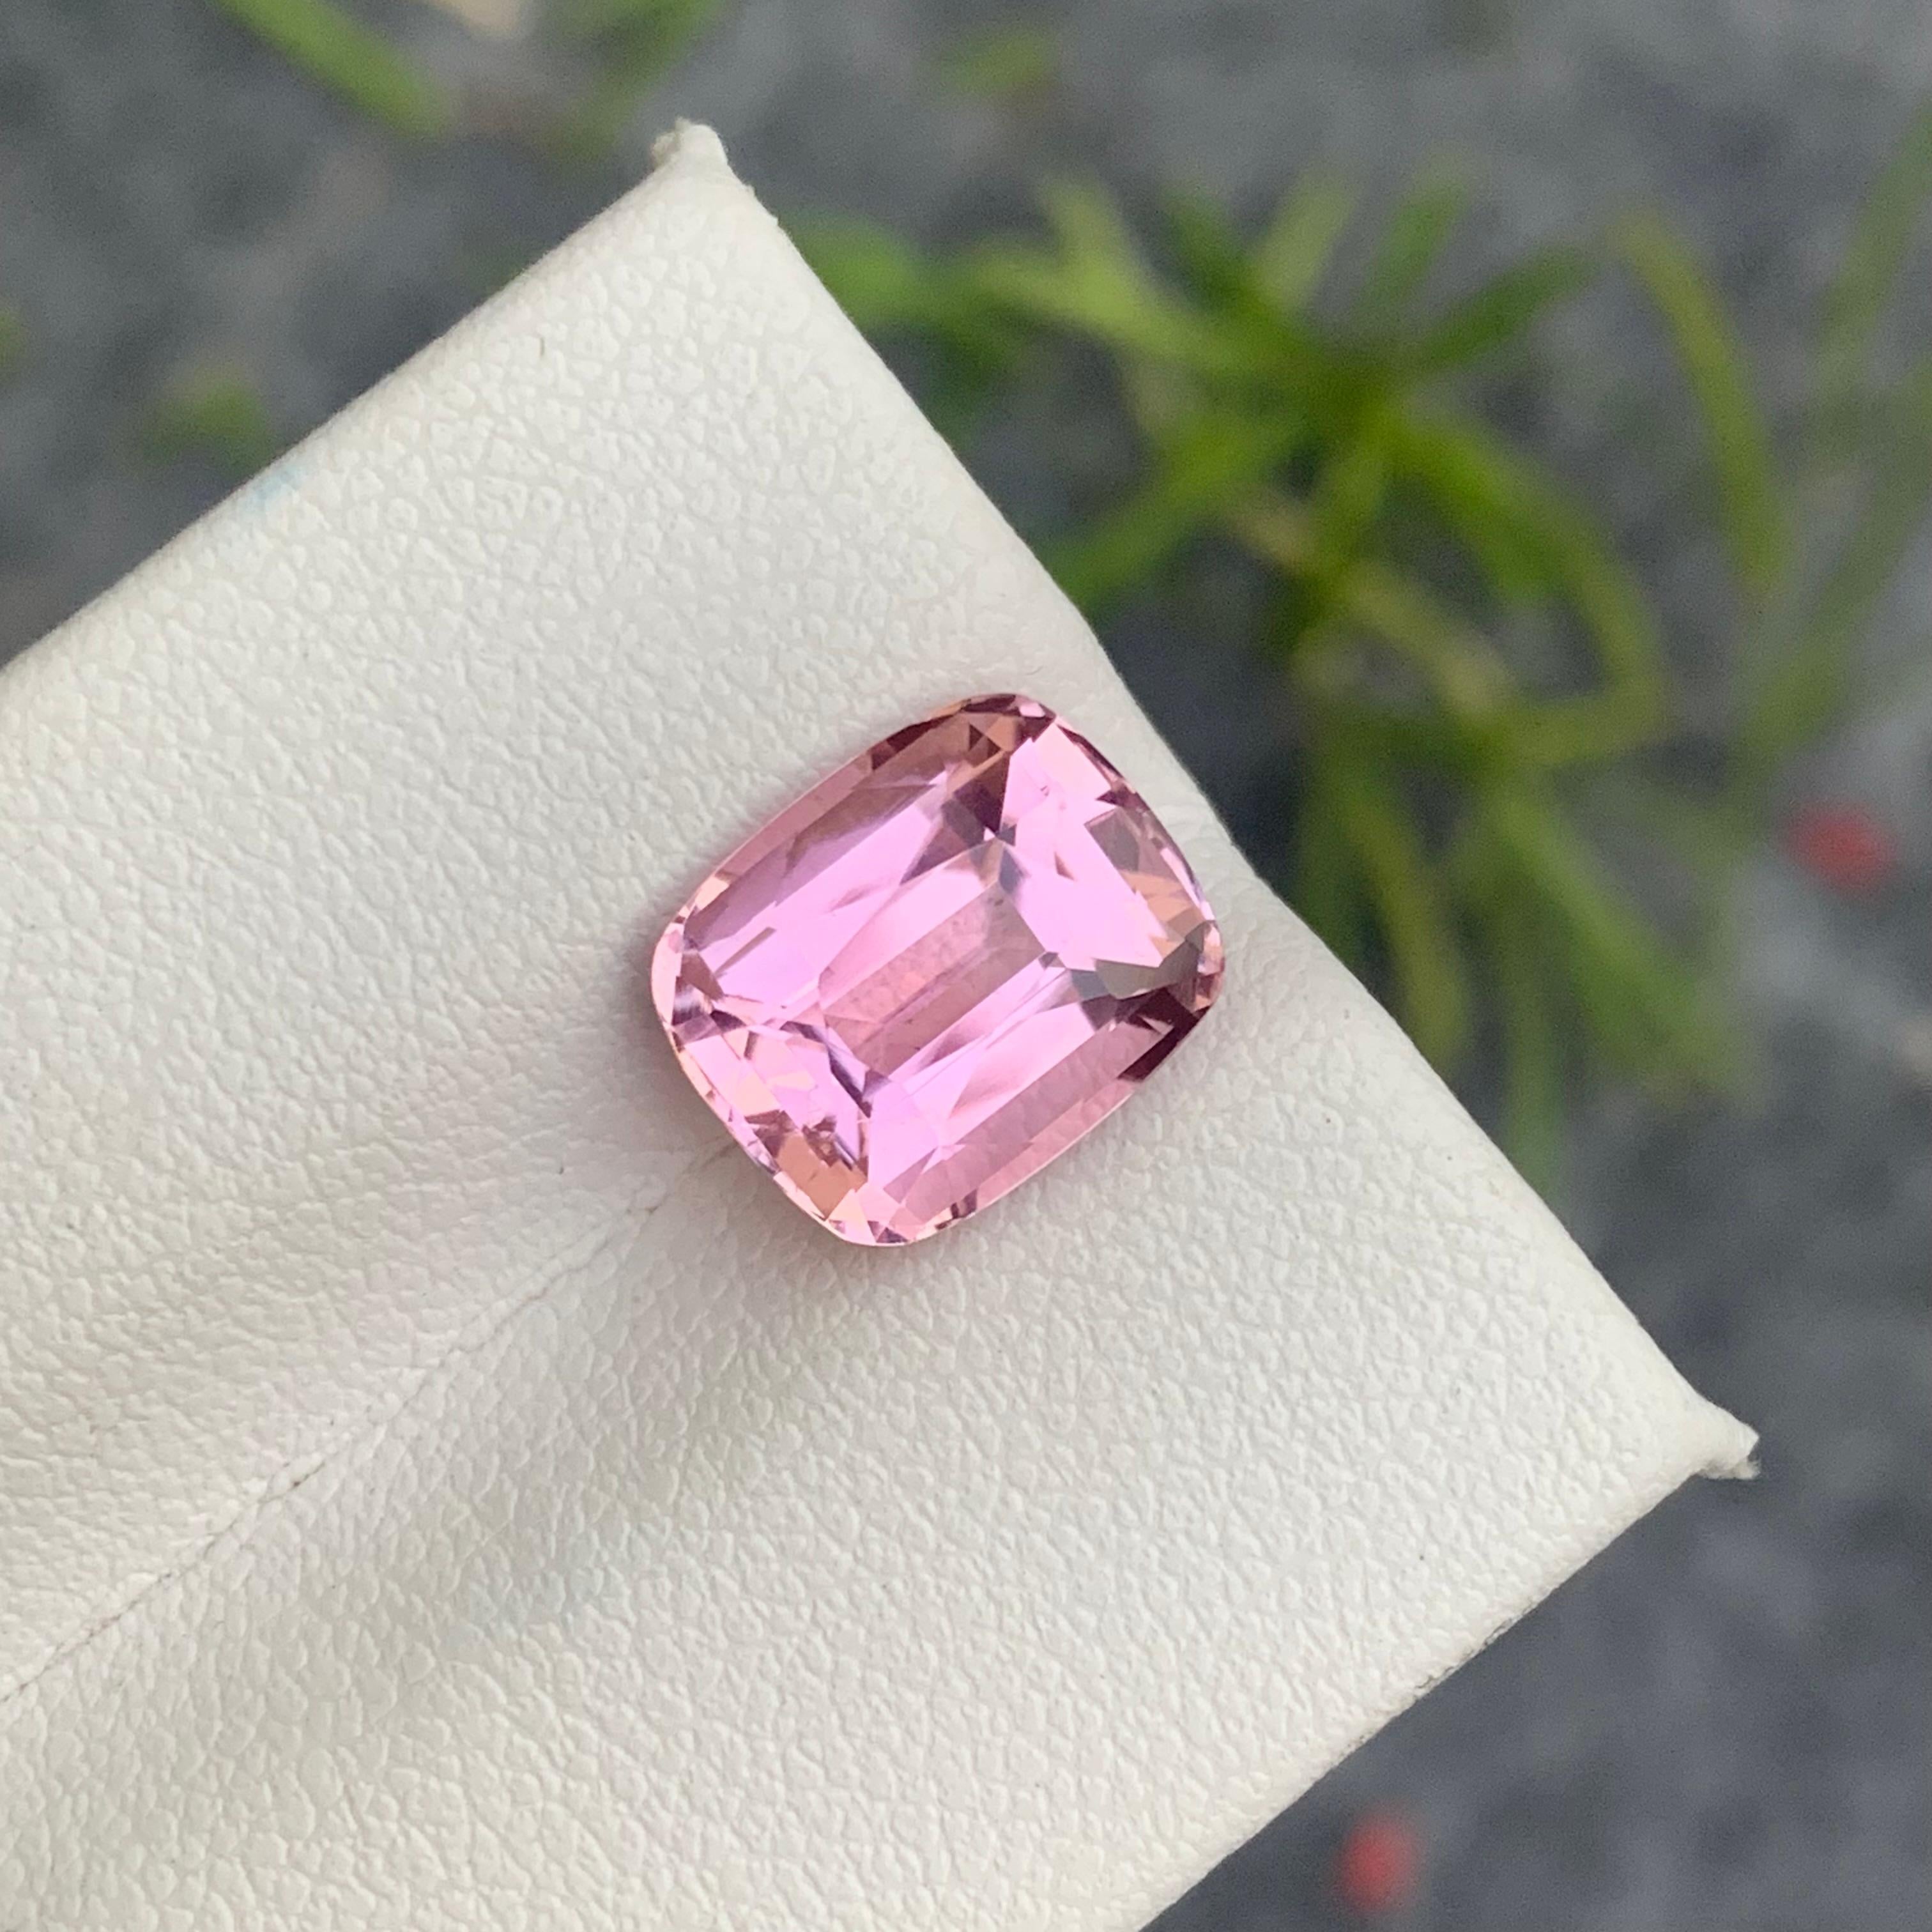 Faceted Tourmaline
Weight: 4.05 Carats
Dimension: 8.4x8.7x6.1 Mm
Origin: Kunar Afghanistan
Color: Pink
Shape: Cushion
Clarity: Eye Clean
Certificate: On Demand

With a rating between 7 and 7.5 on the Mohs scale of mineral hardness, tourmaline